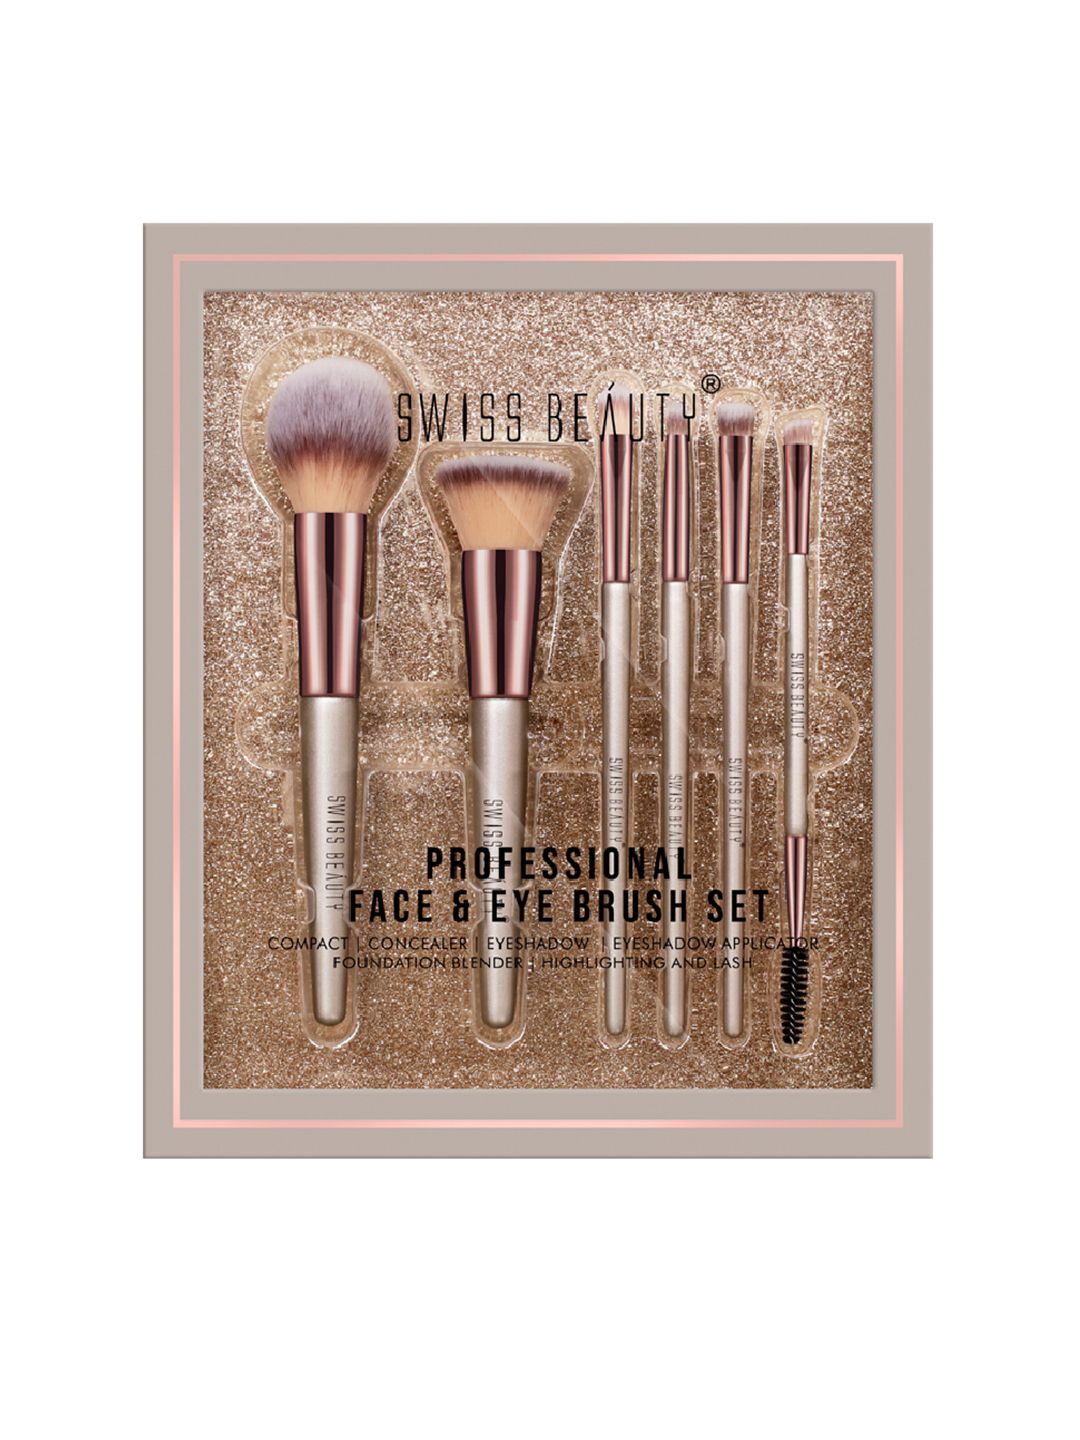 SWISS BEAUTY Professional Face & Eye Brush Set Price in India